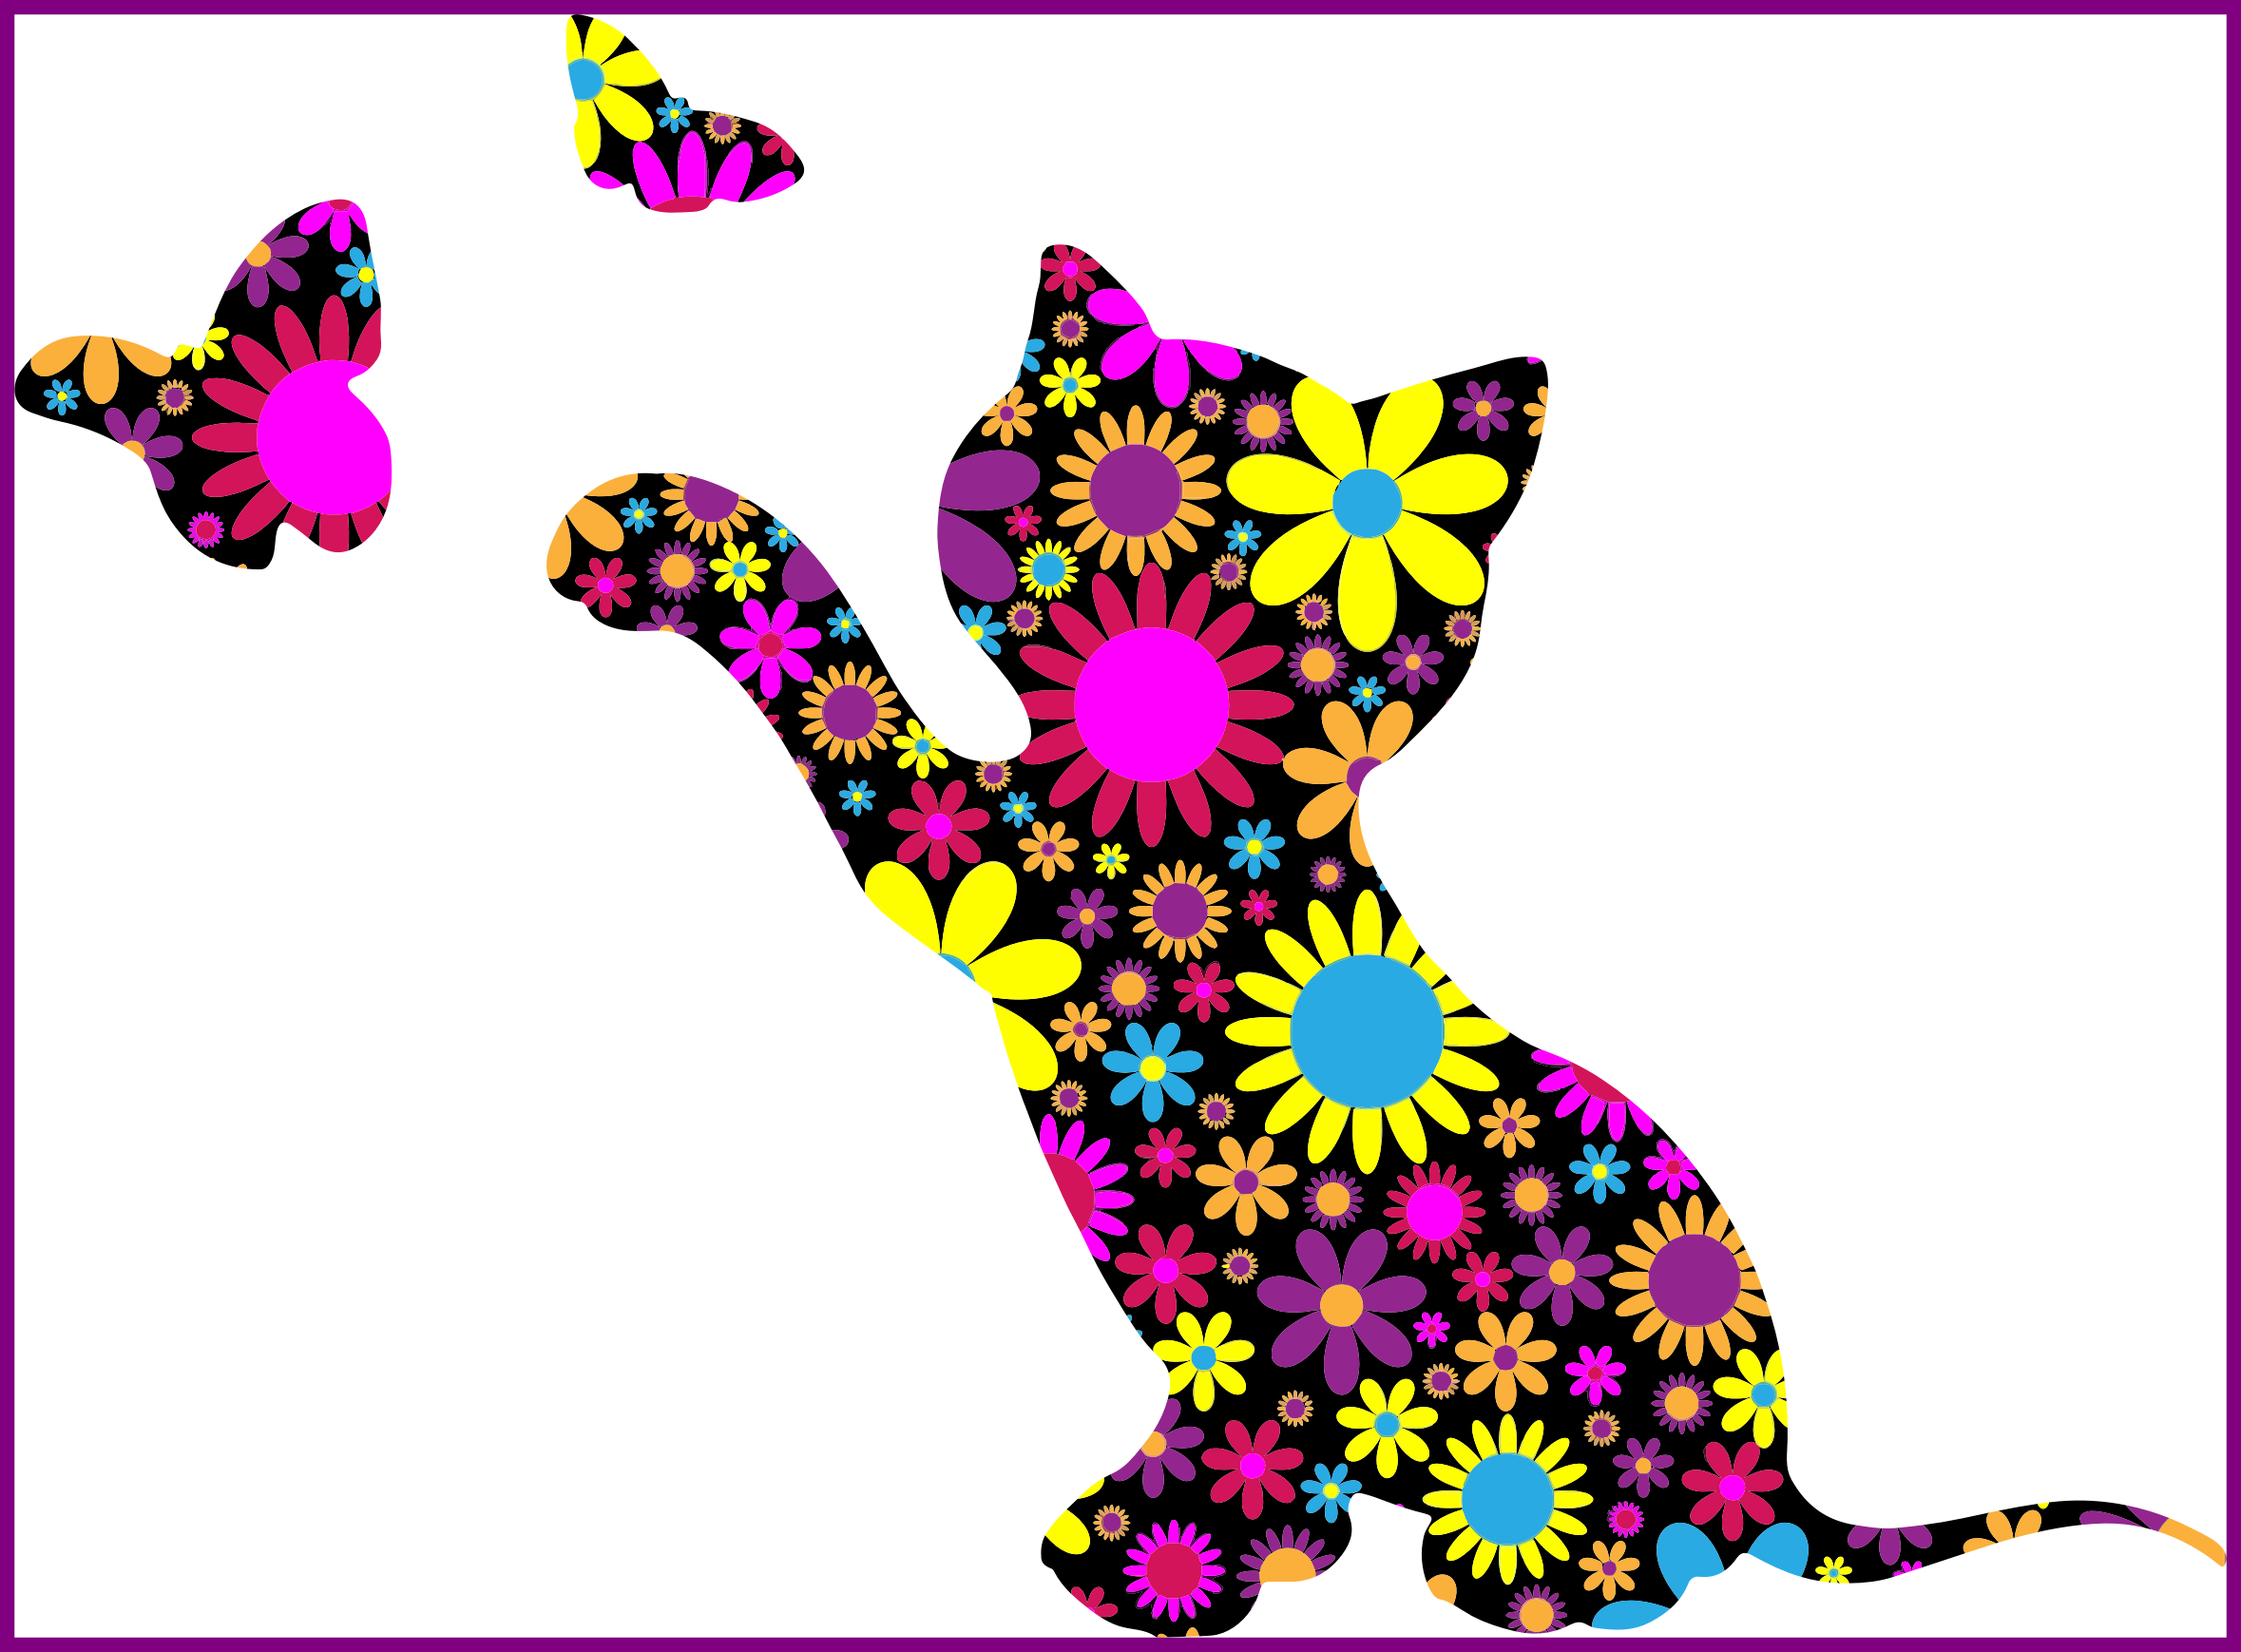 clipart cat butterfly